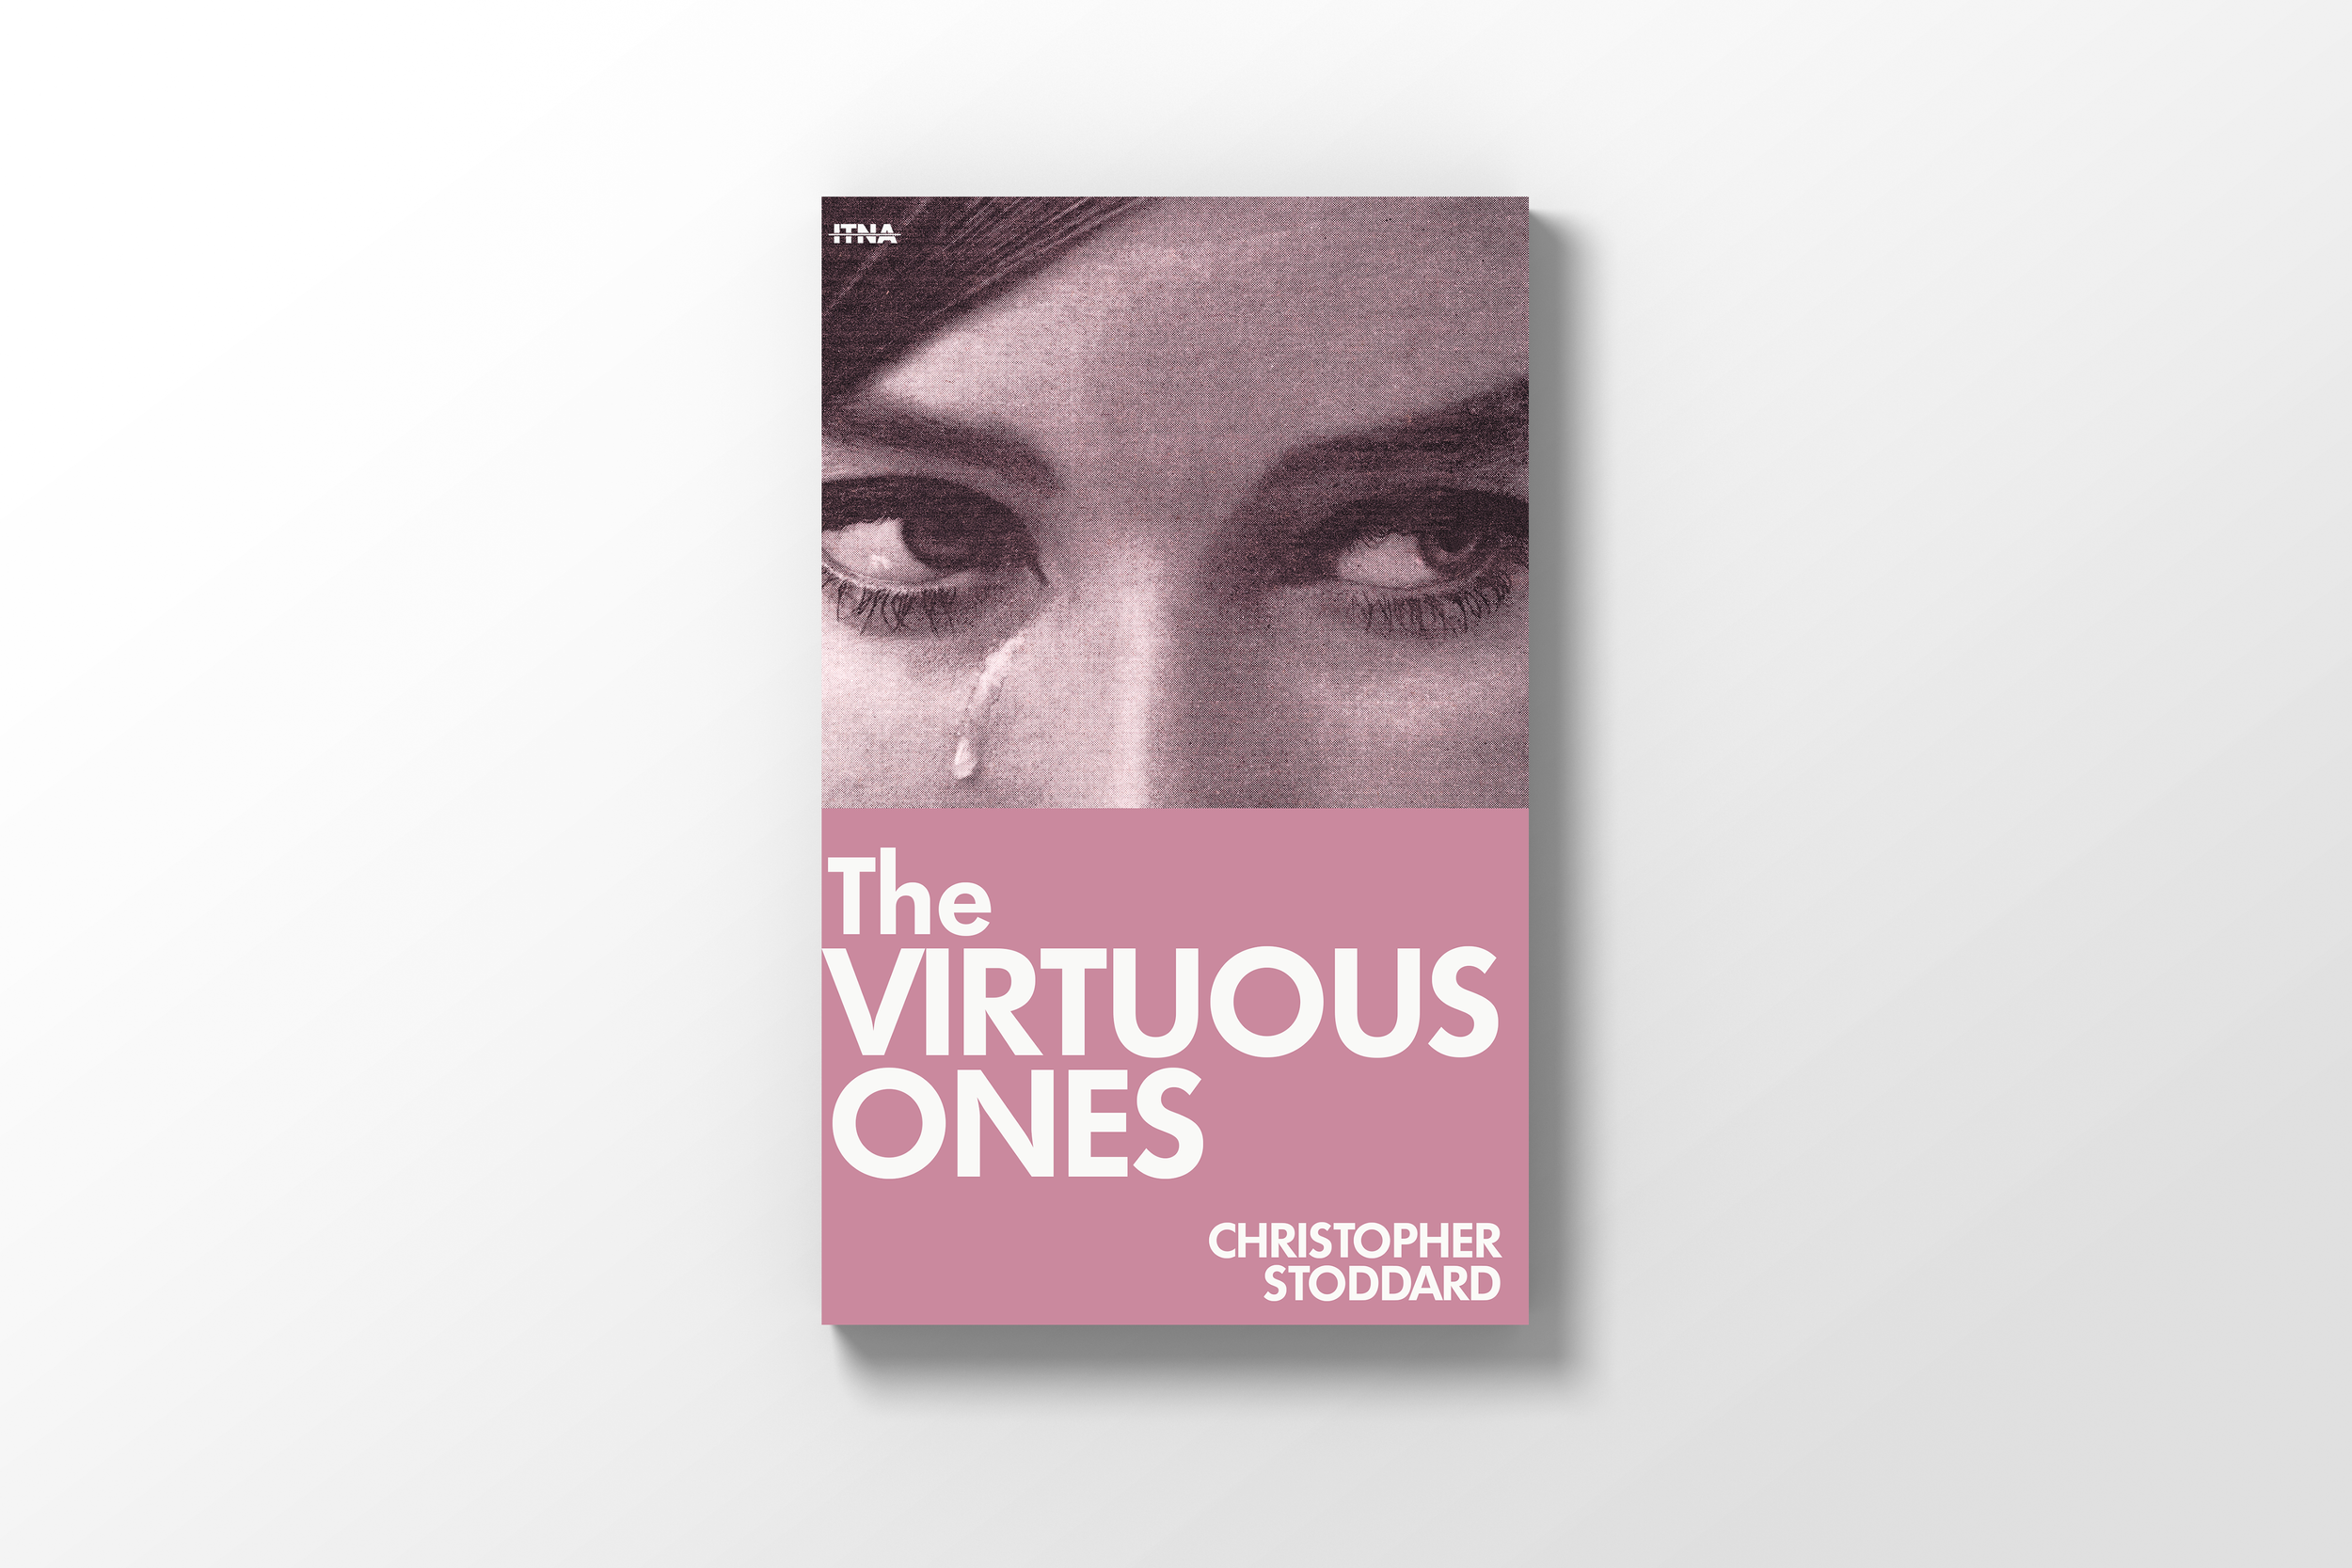 THE VIRTUOUS ONES | Christopher Stoddard